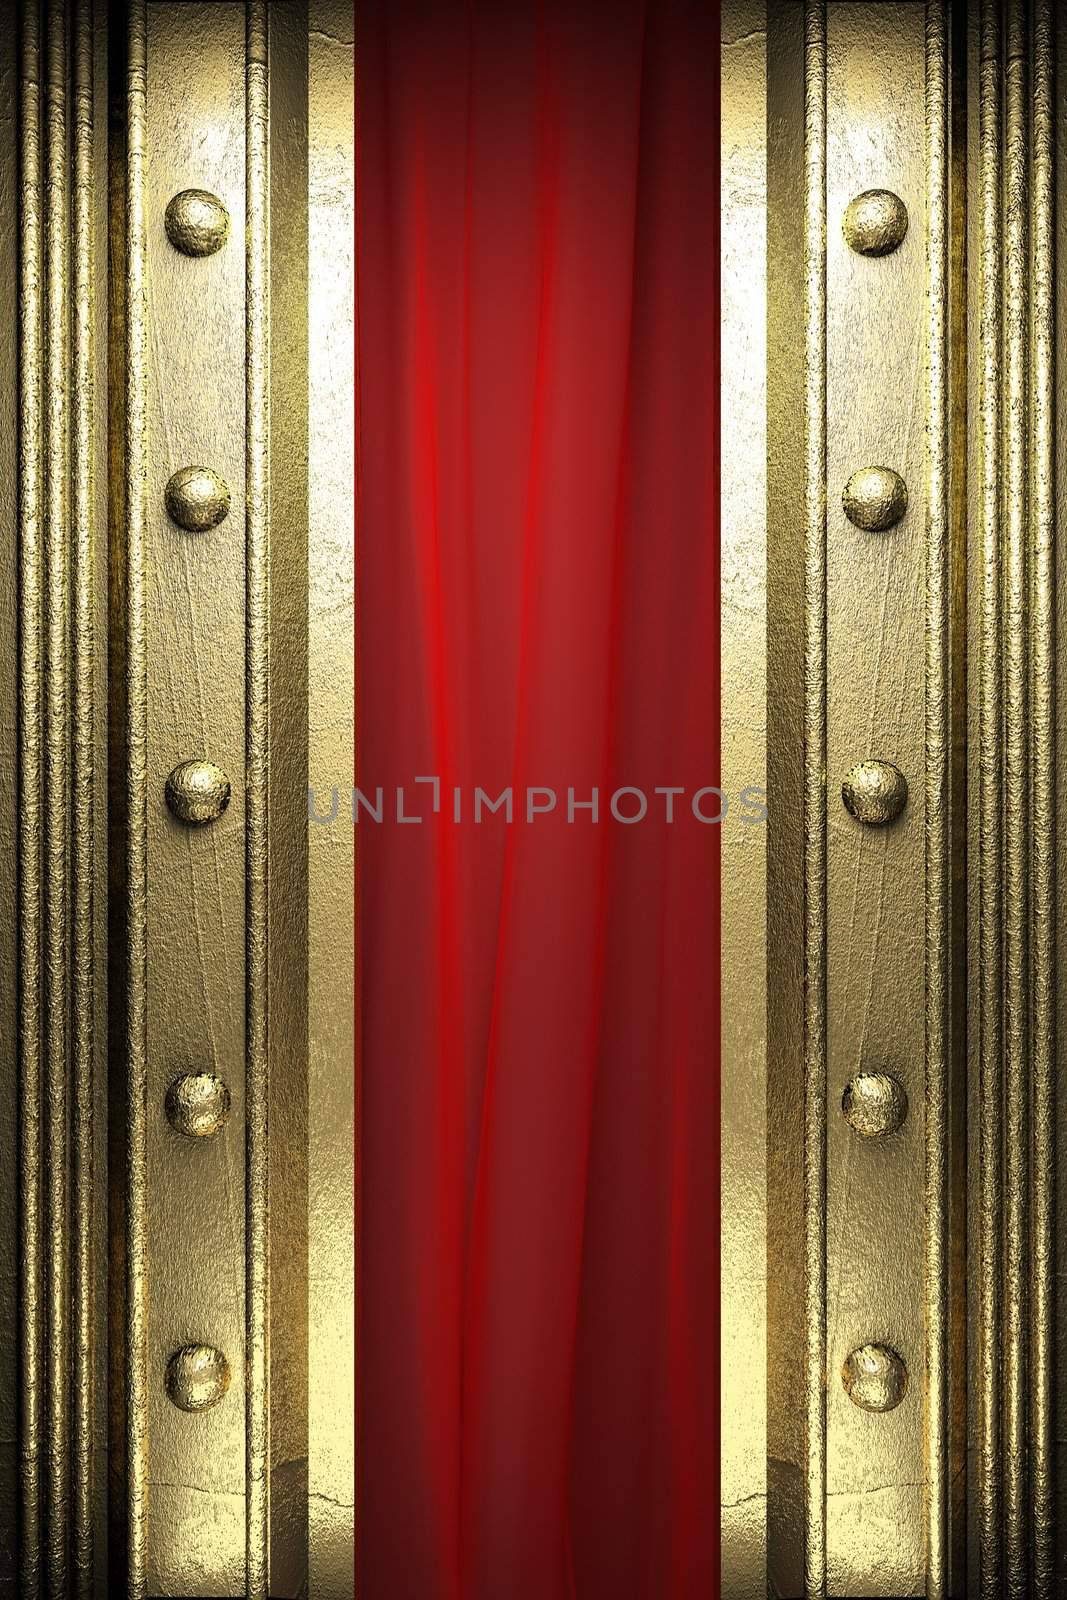 gold on red curtain by videodoctor